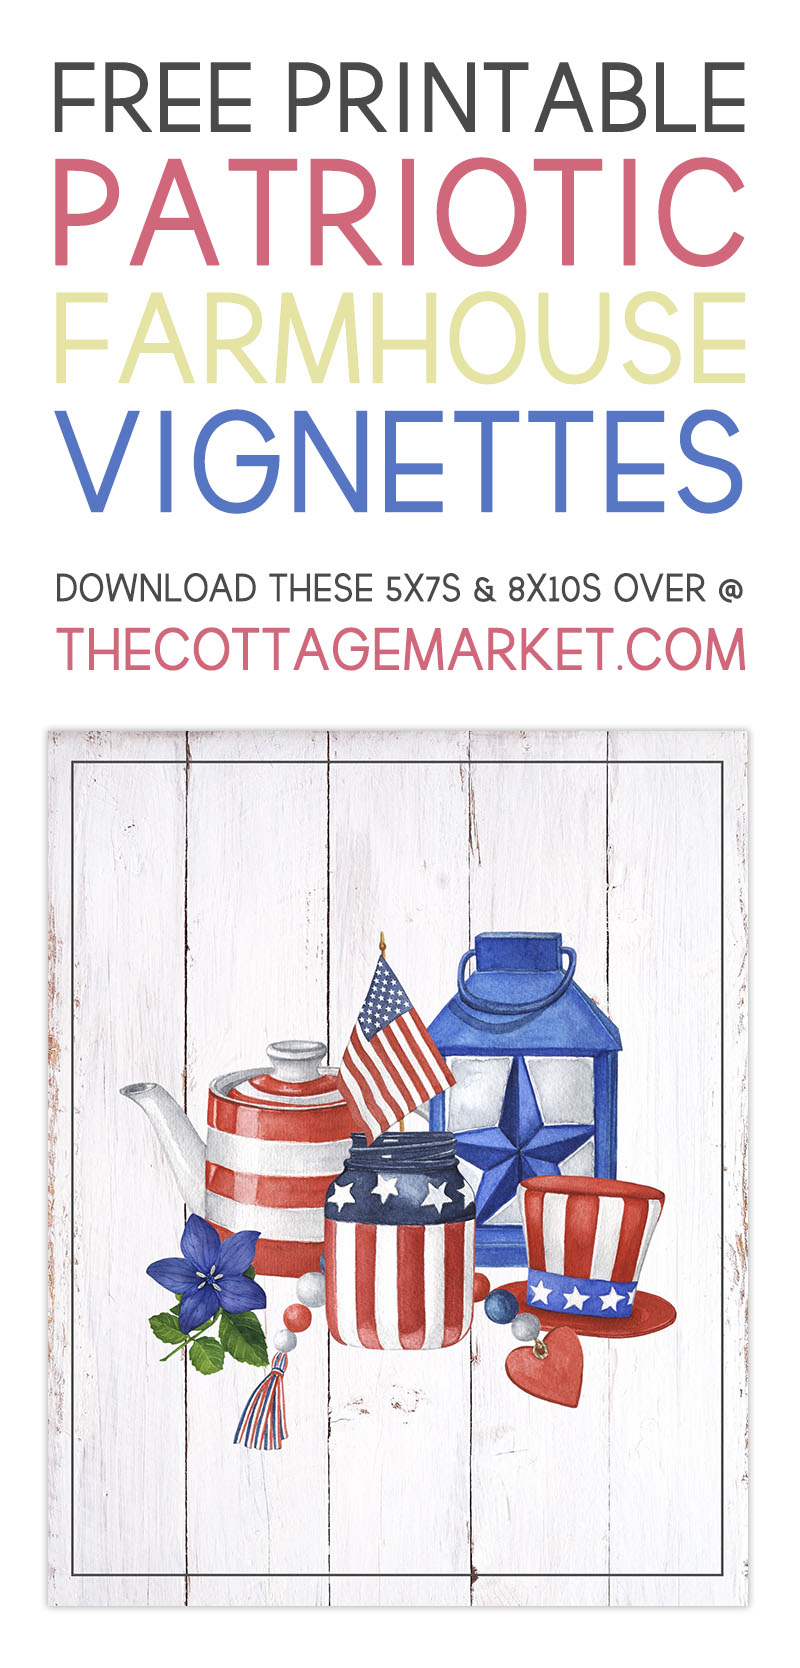 These Free Printable Patriotic Farmhouse Vignettes are going to add a touch of charm... vintage  and a touch of Red, White and Blue to your space!   Perfect for Memorial Day, Fourth of July and much much more